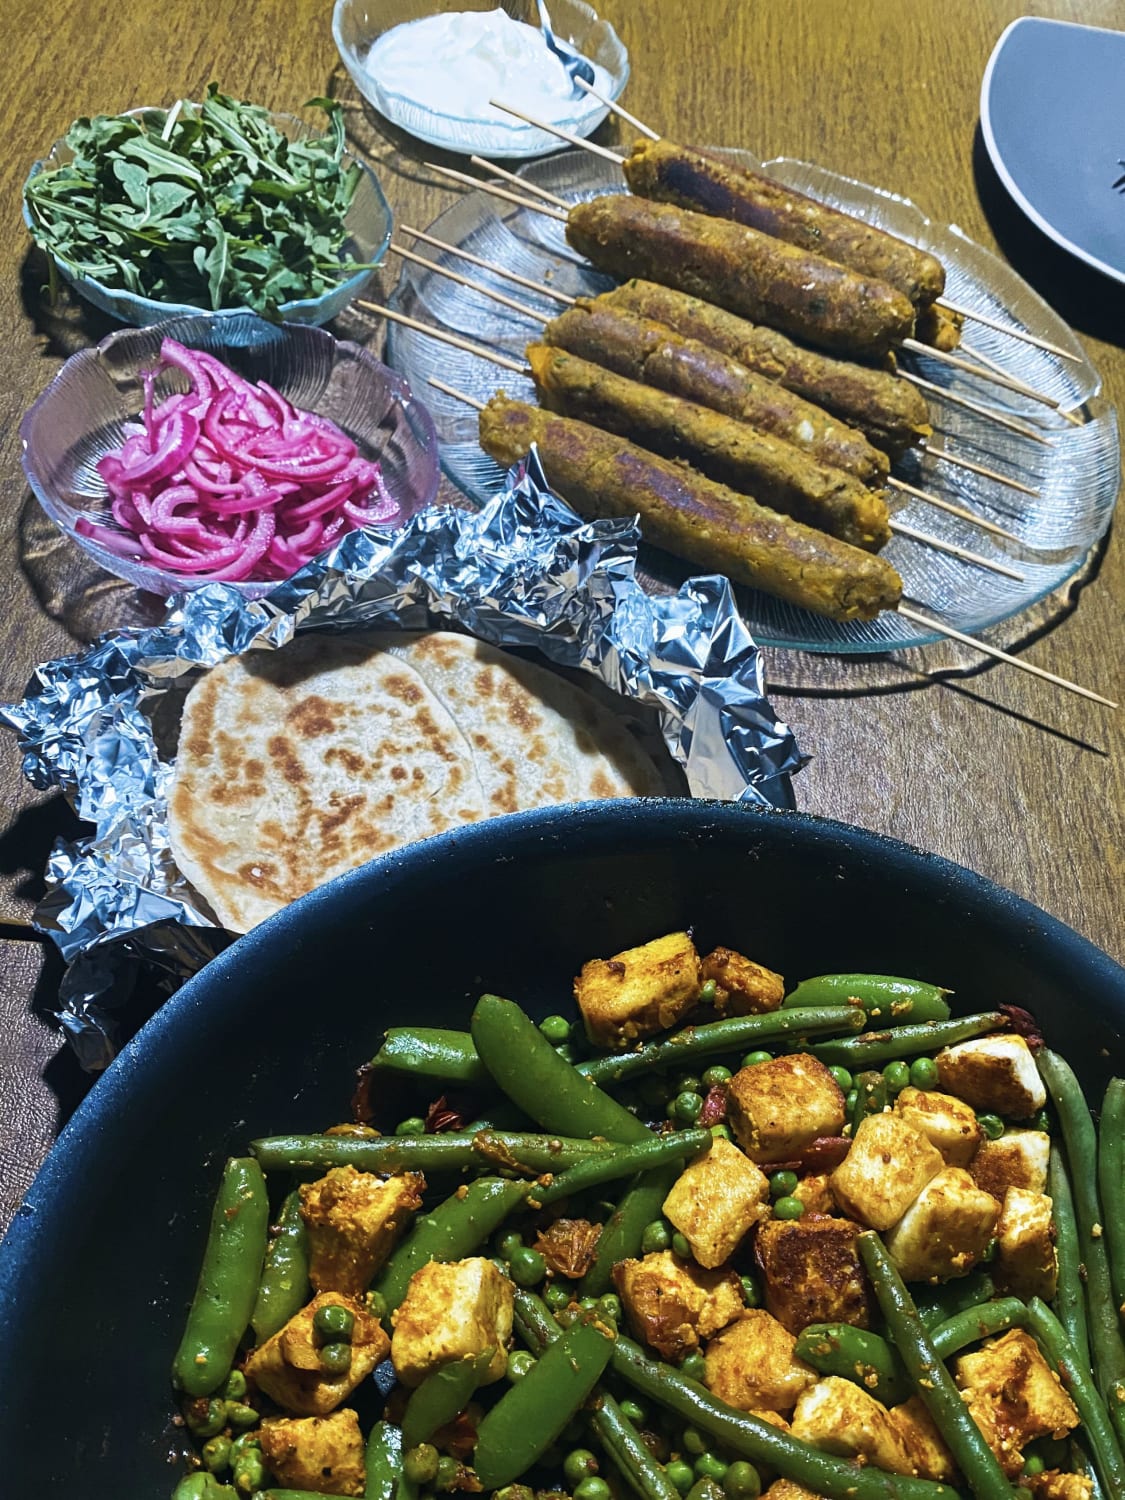 made all of this from scratch: butternut squash and chickpea kebabs, parathas, and an updated take on matar paneer